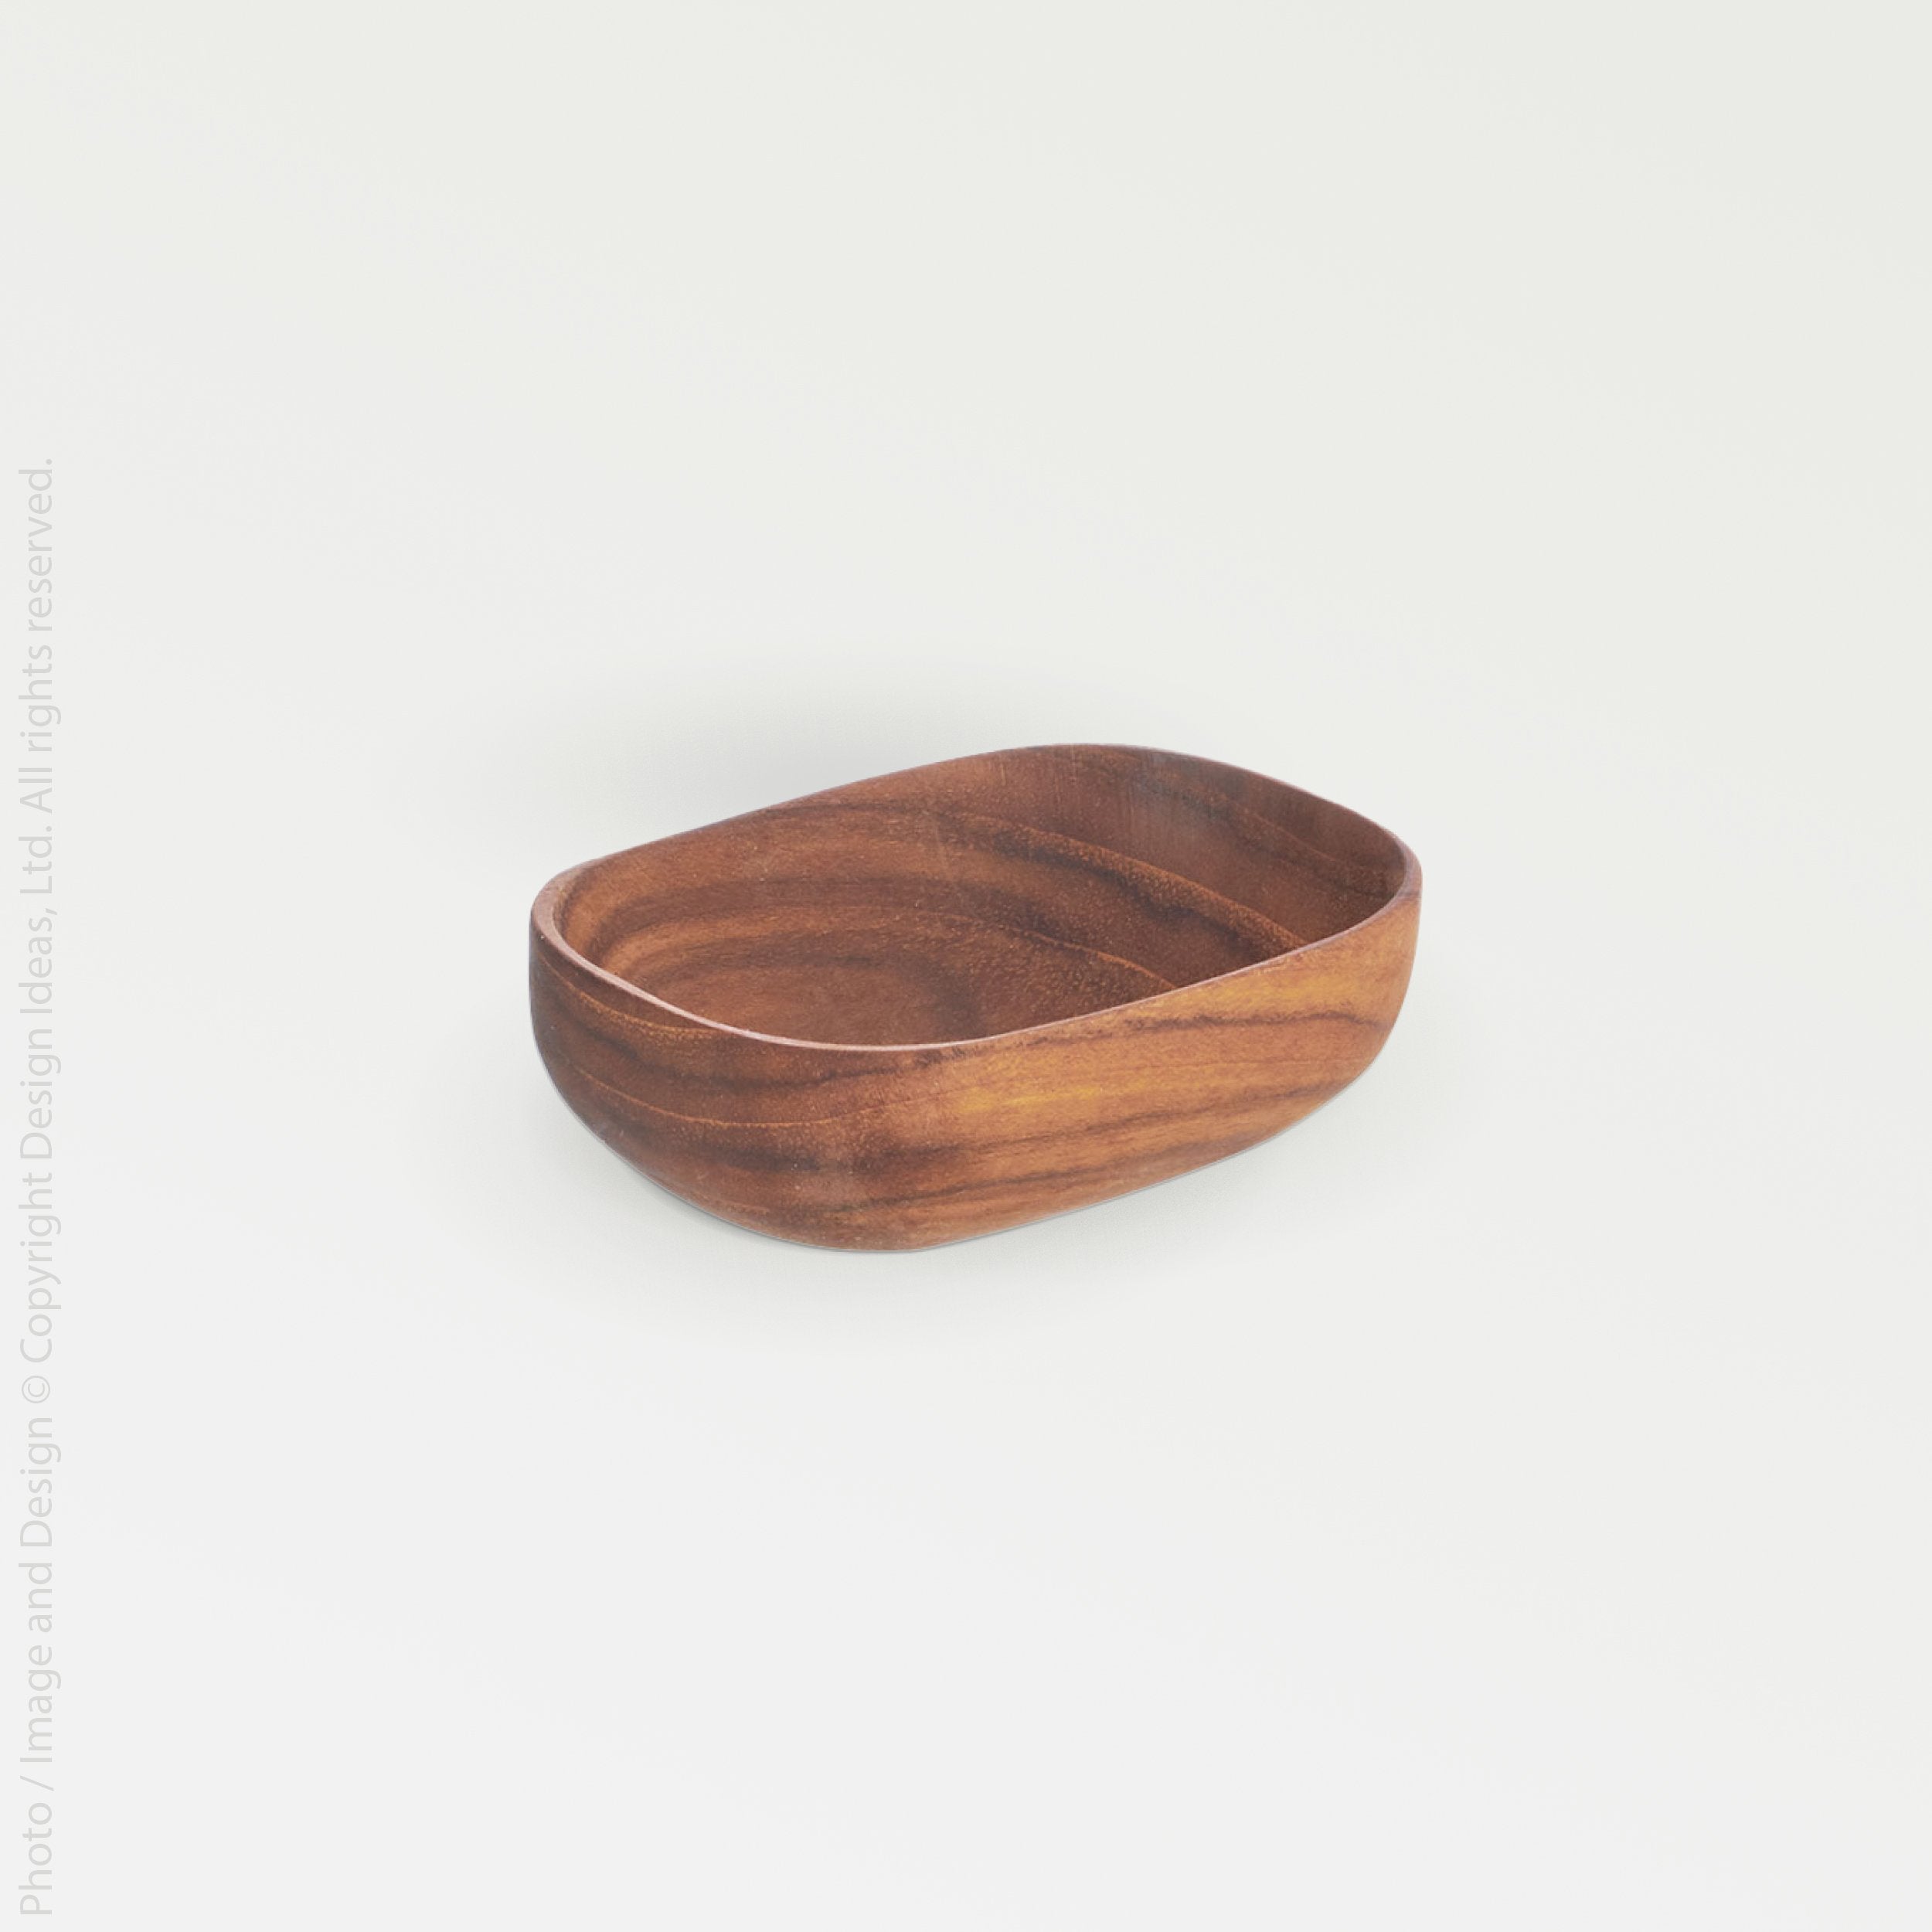 Chiku Teak Rectangular Bowl - Black Color | Image 1 | From the Chiku Collection | Exquisitely assembled with natural teak for long lasting use | This bowl is sustainably sourced | Available in natural color | texxture home